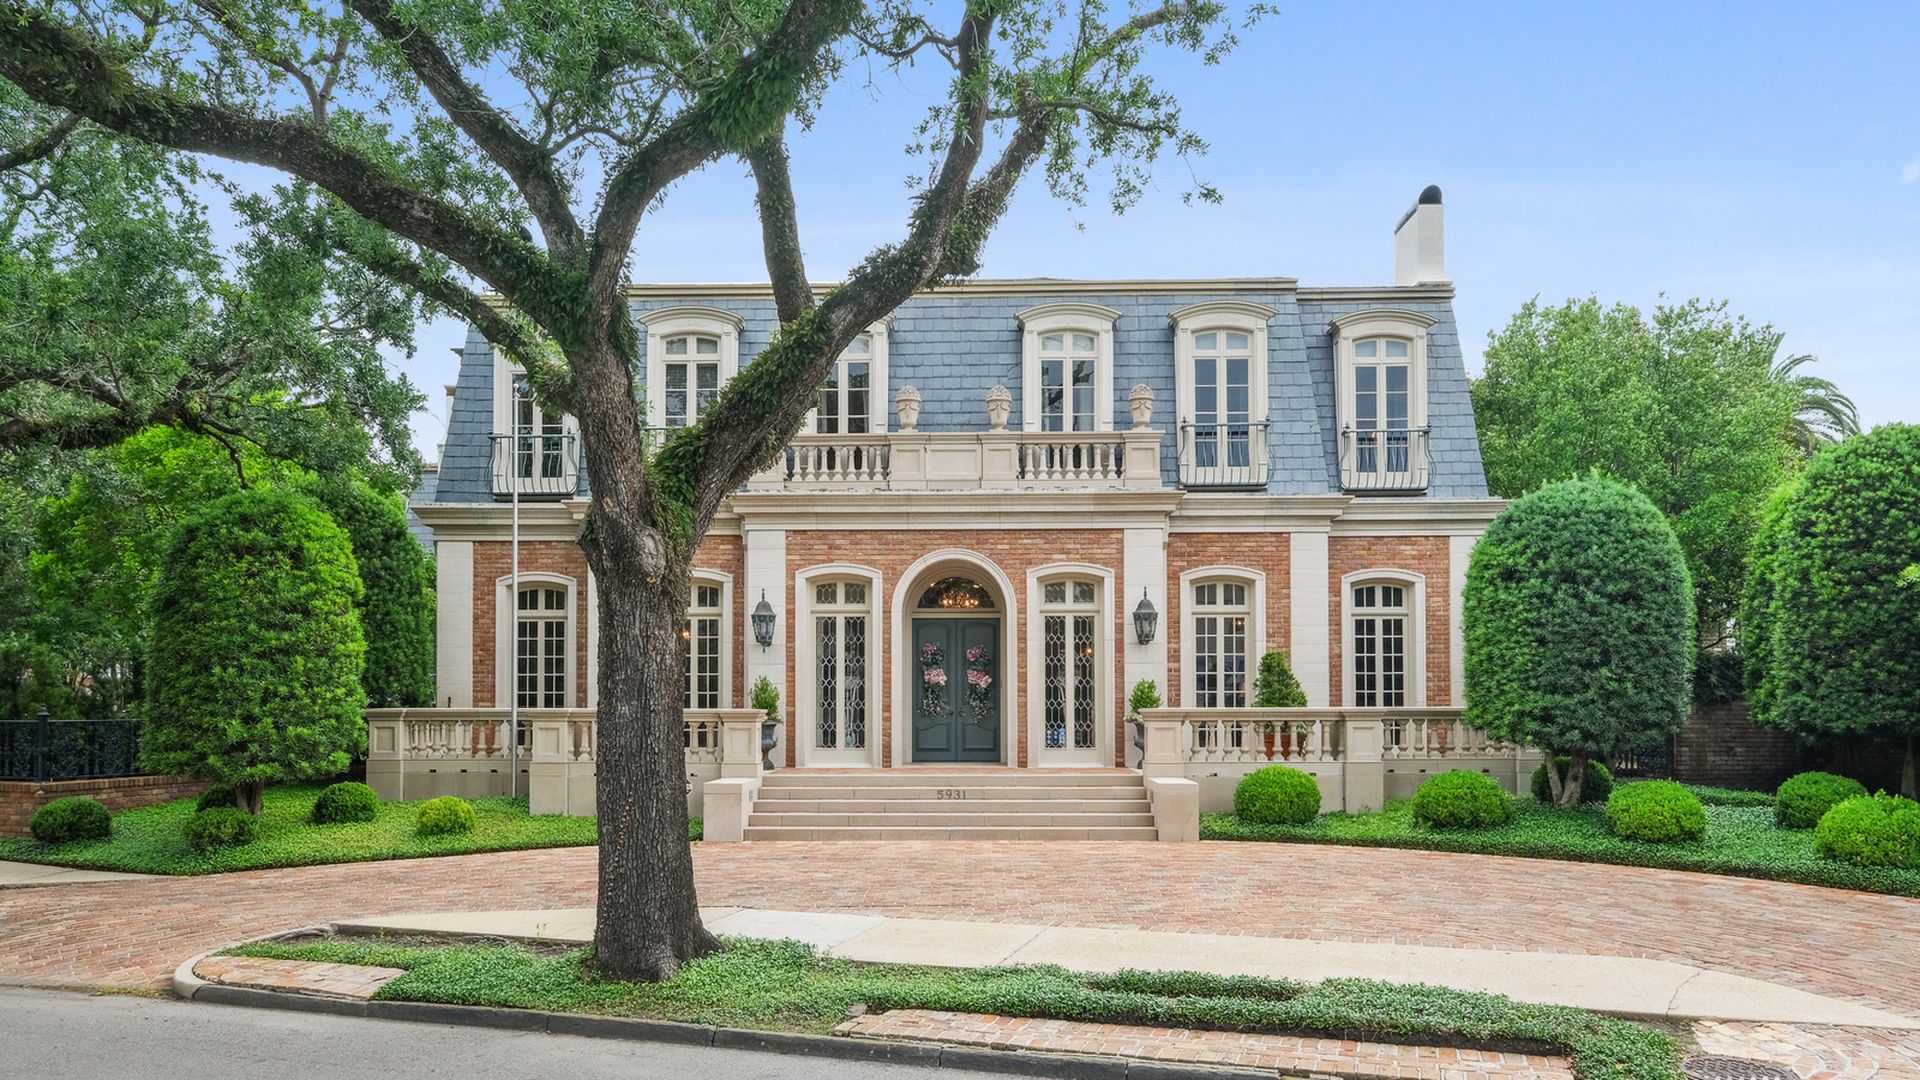 The facade of a home at 5931 St. Charles Avenue shows French influence.